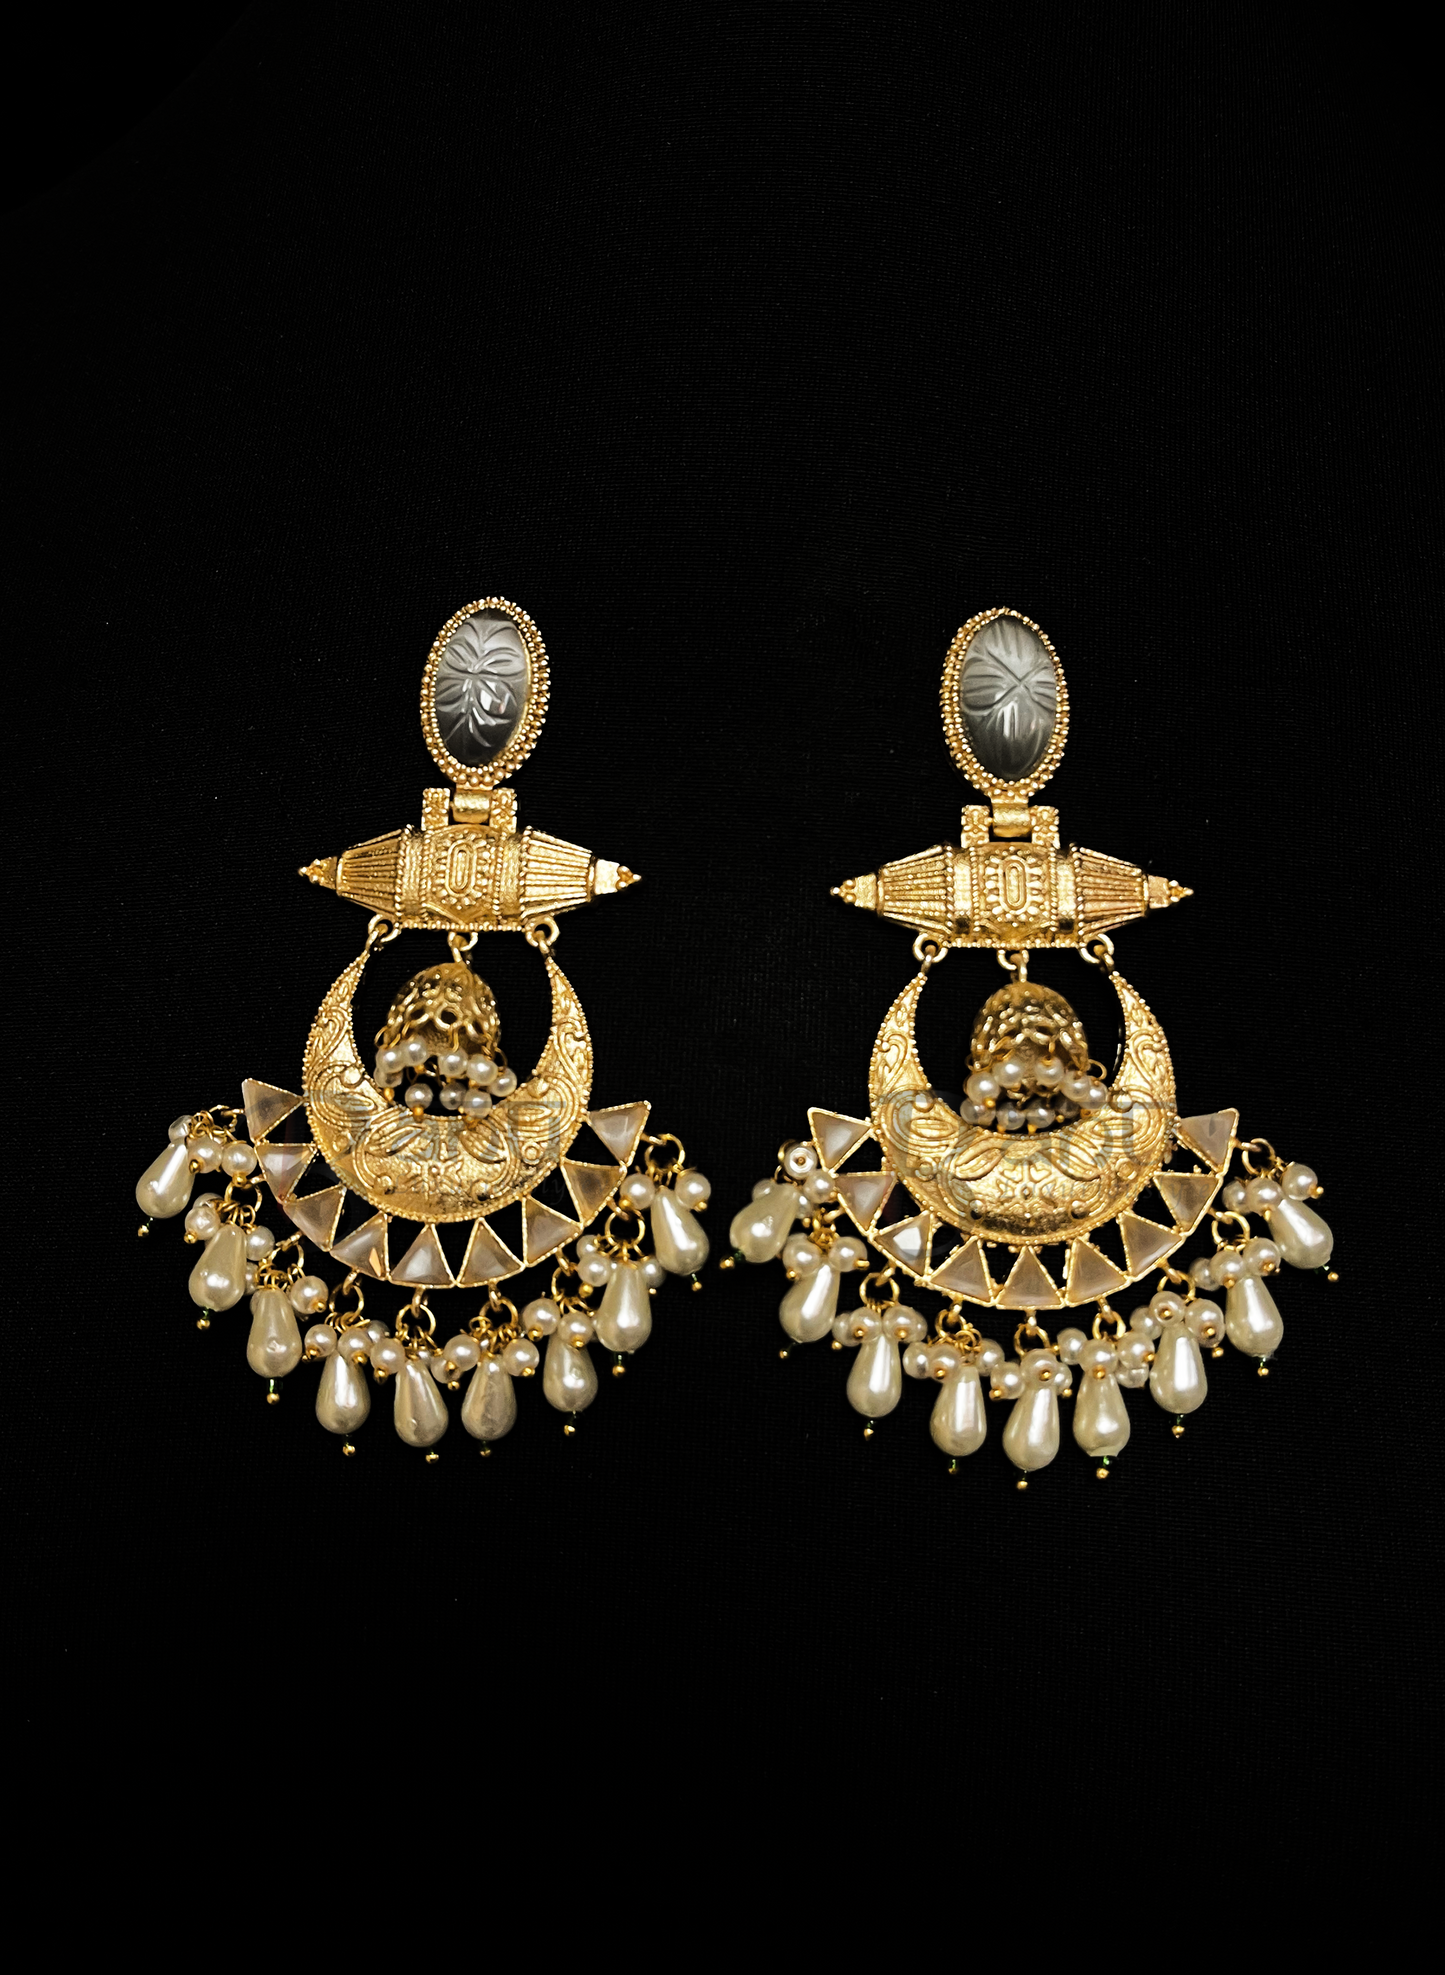 Grey Ombre Amrapali earrings with pearls for Indian brides